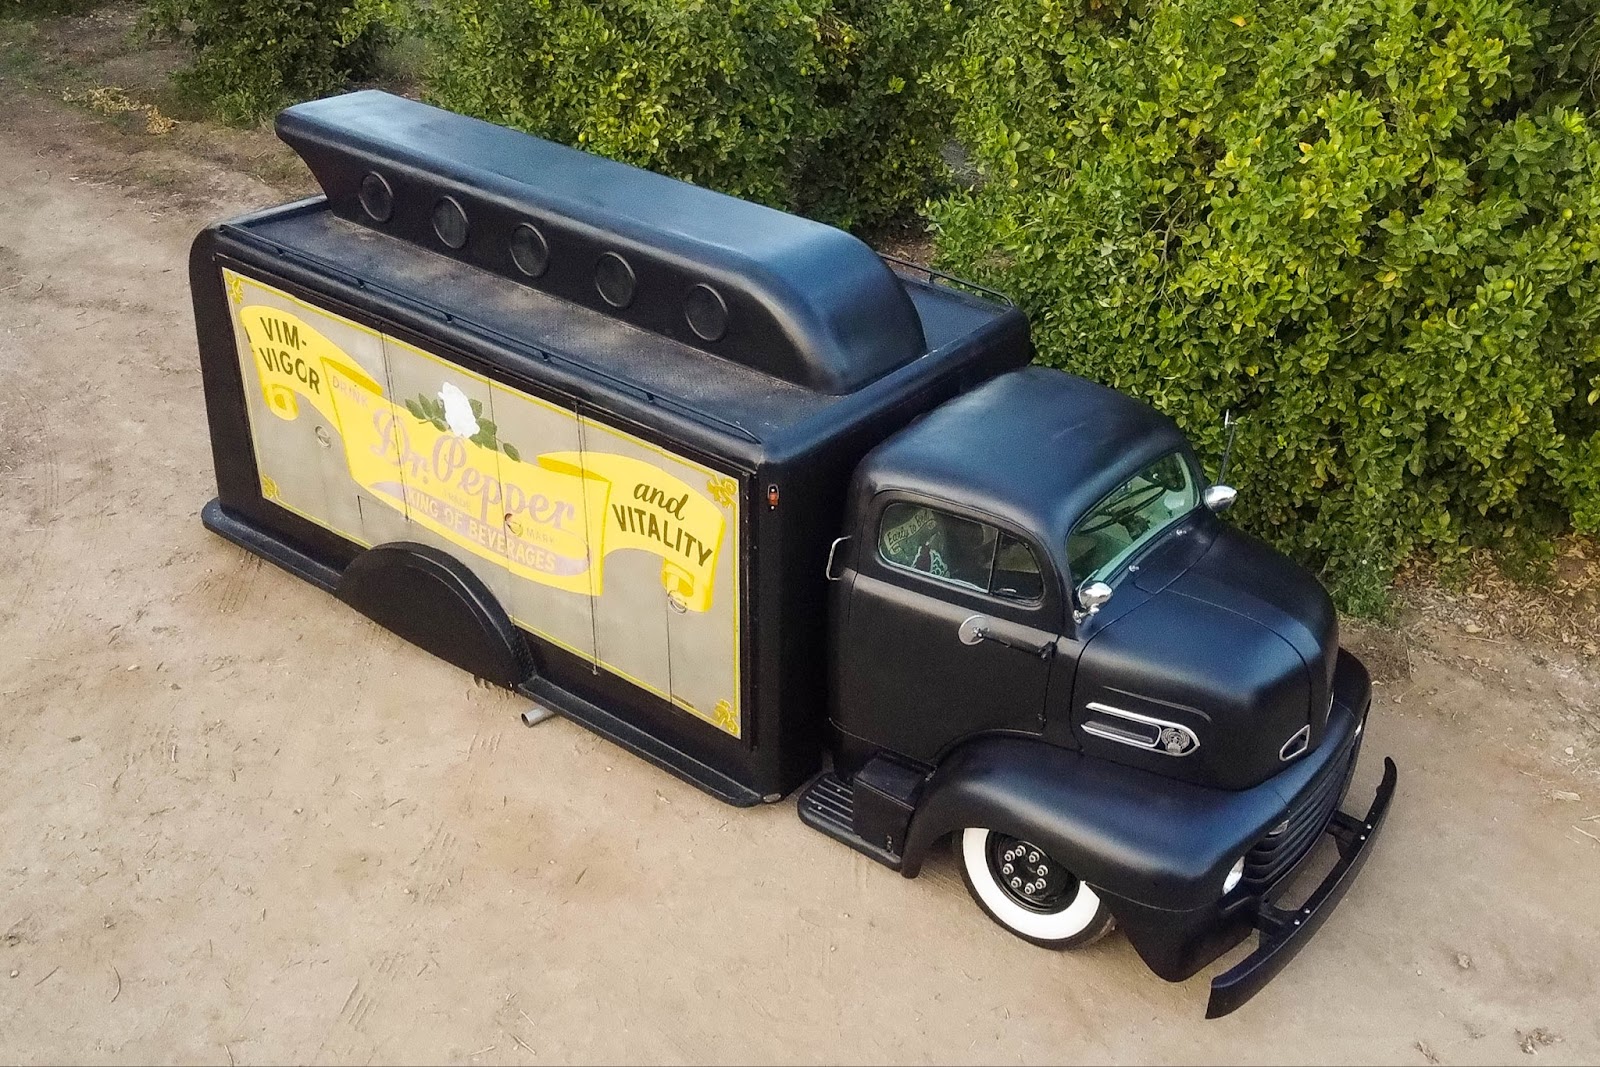 1948 Ford COE: A Classic Truck Marvel